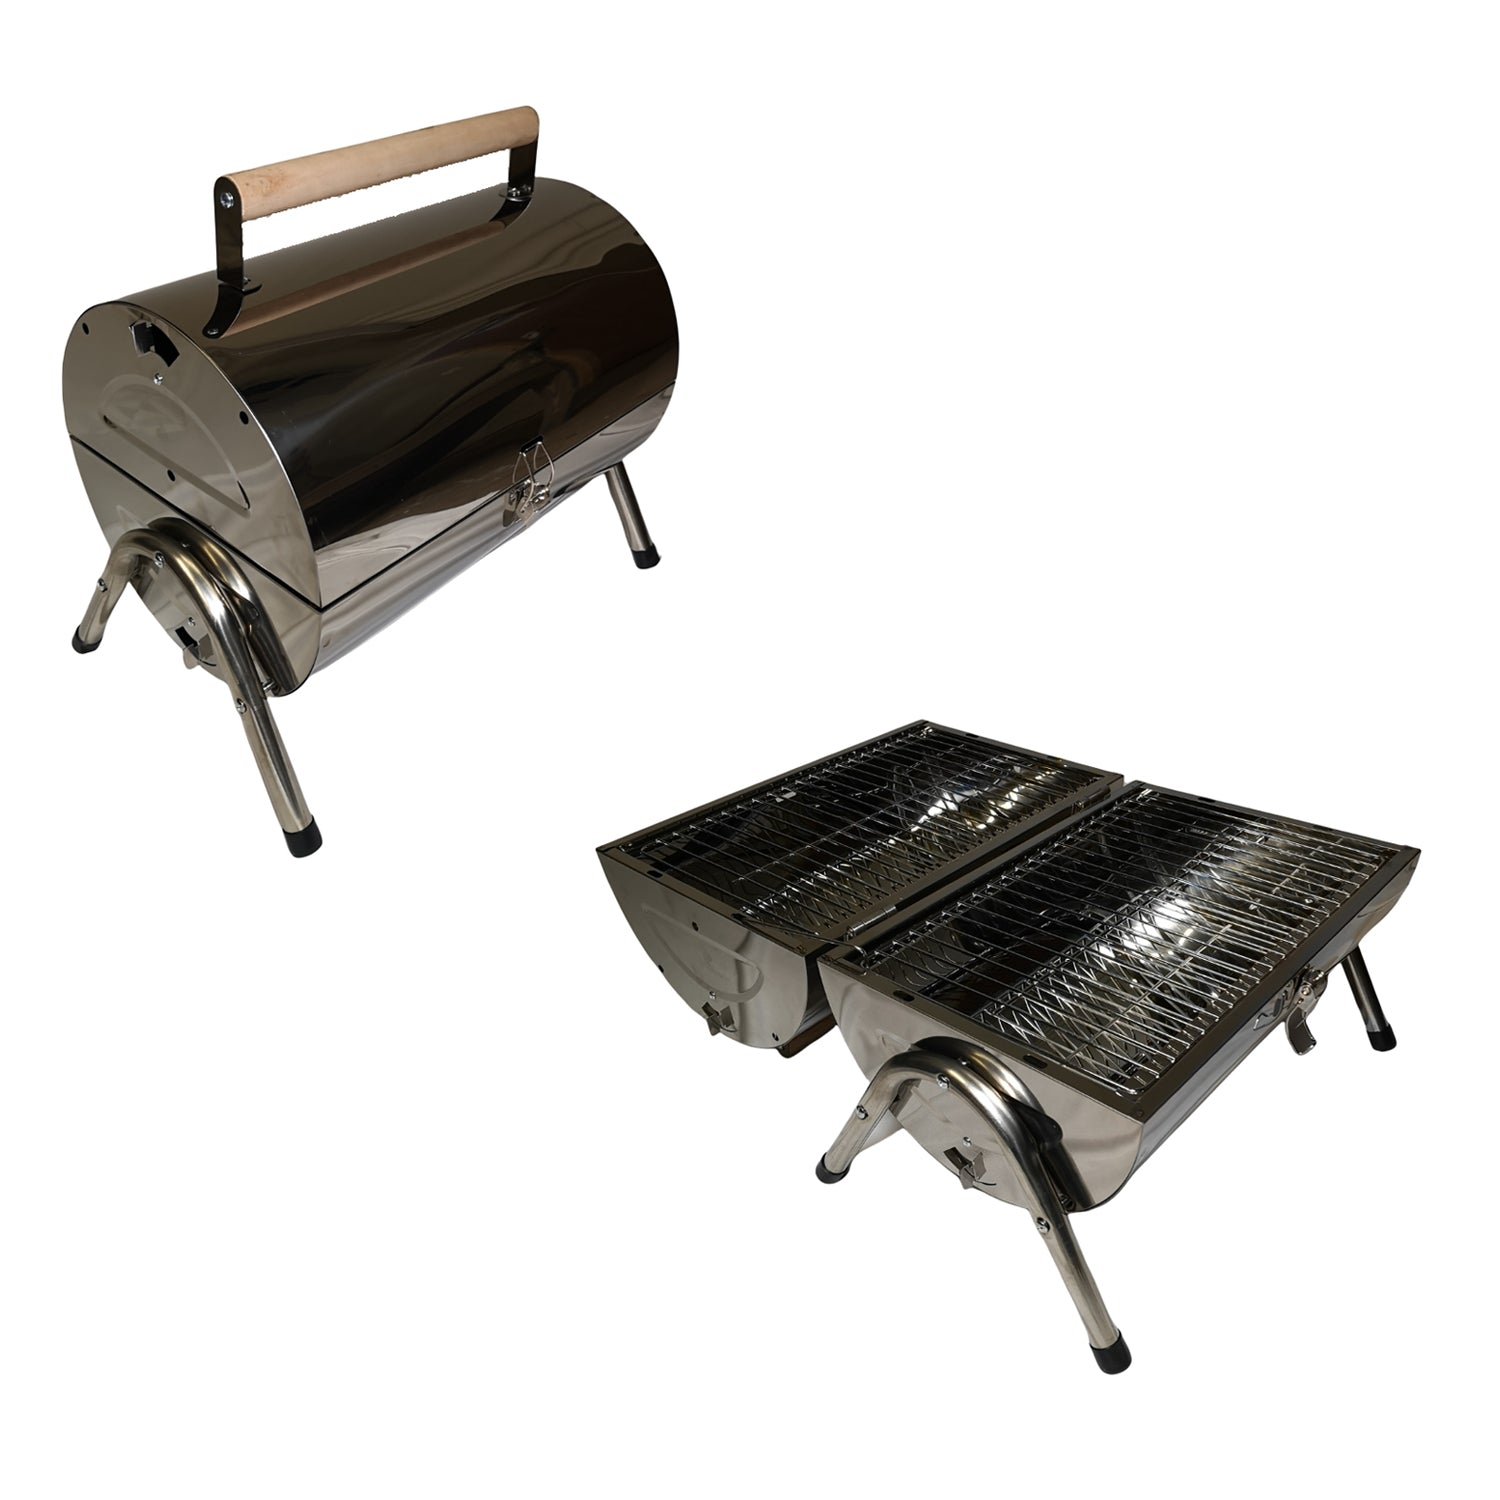 Portable Stainless Steel Barrel BBQ Grill With Handle